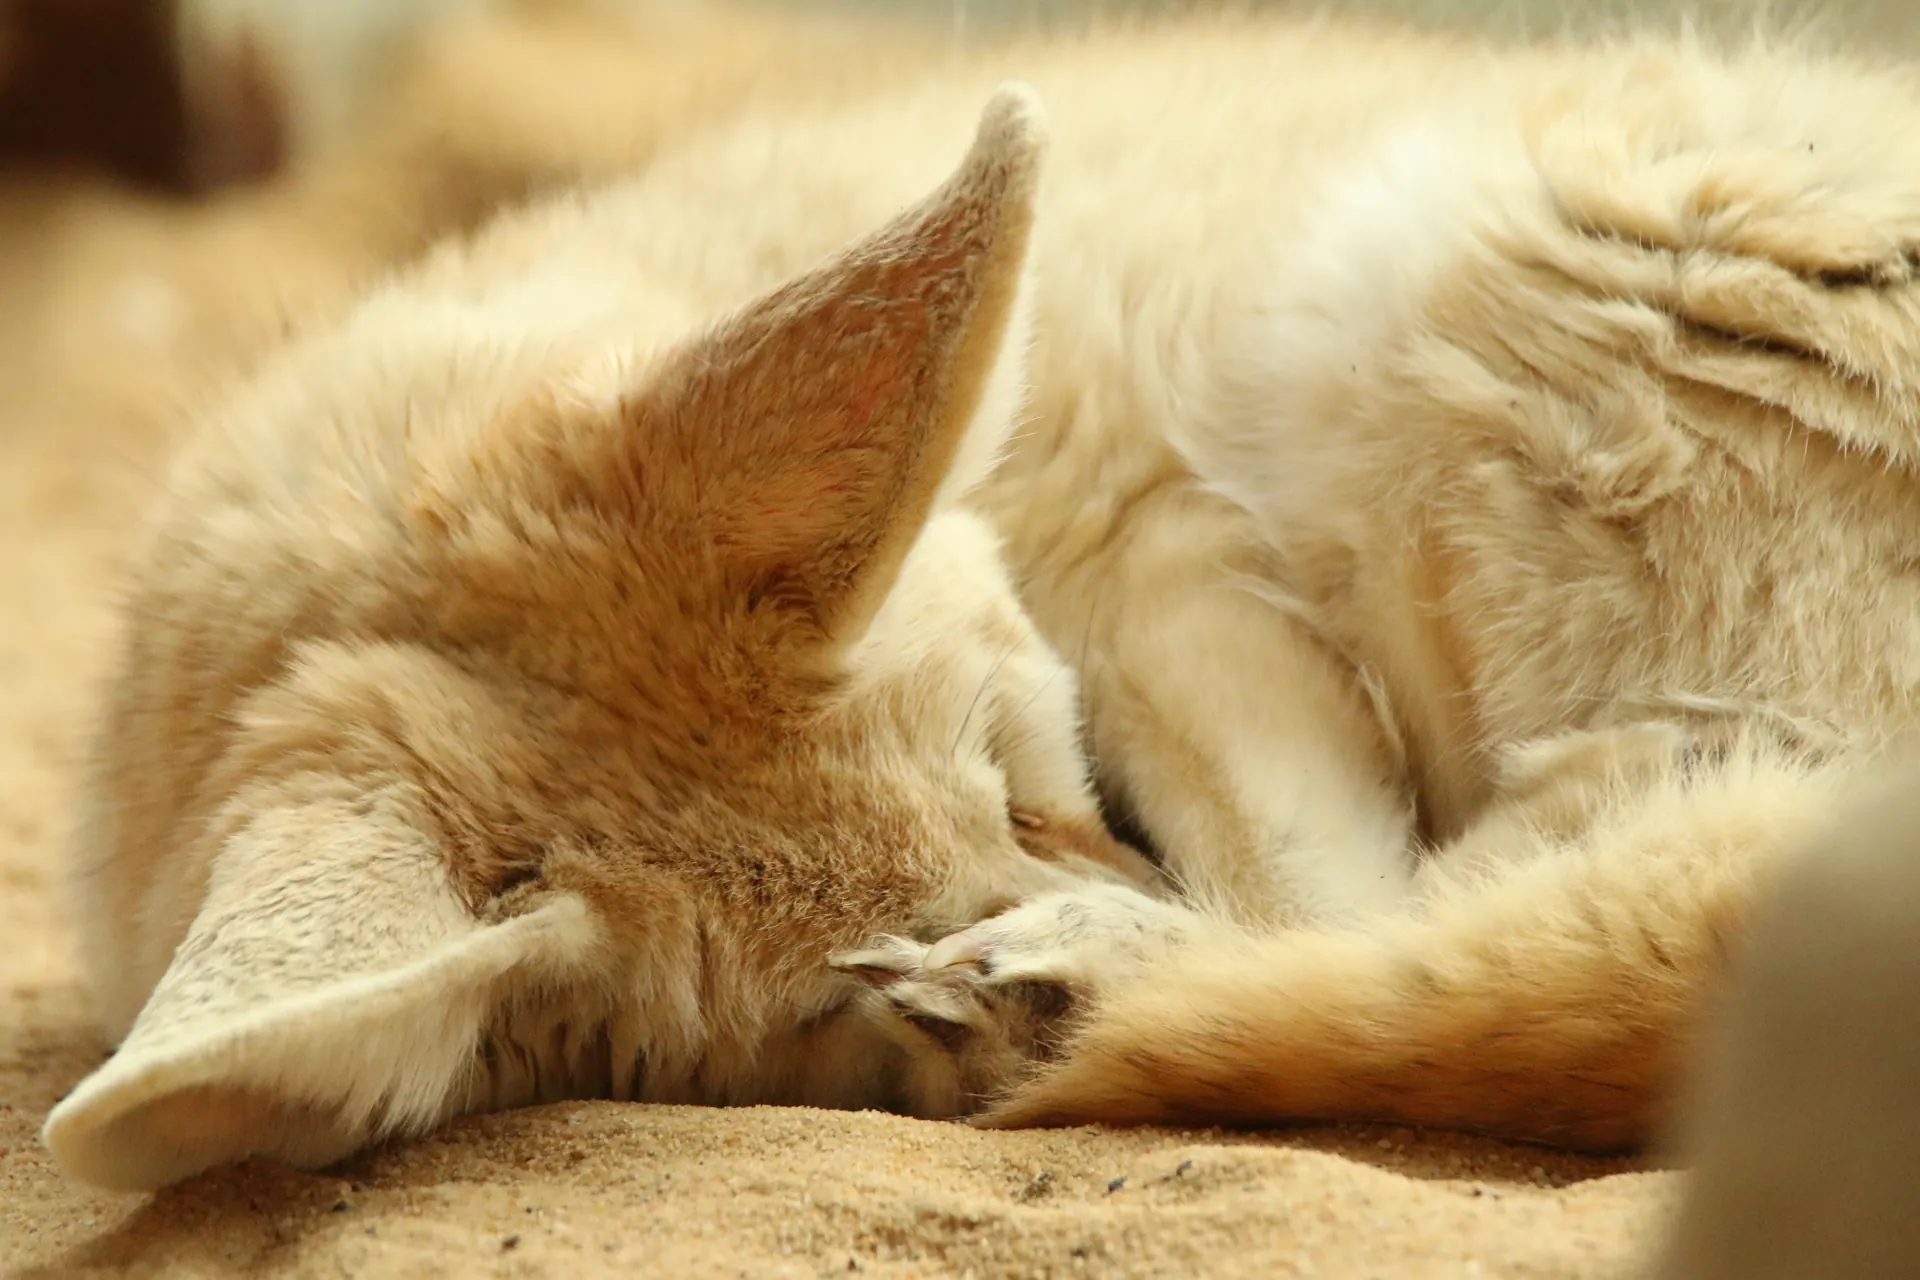 A curled up and very sleepy looking little fennec fox.